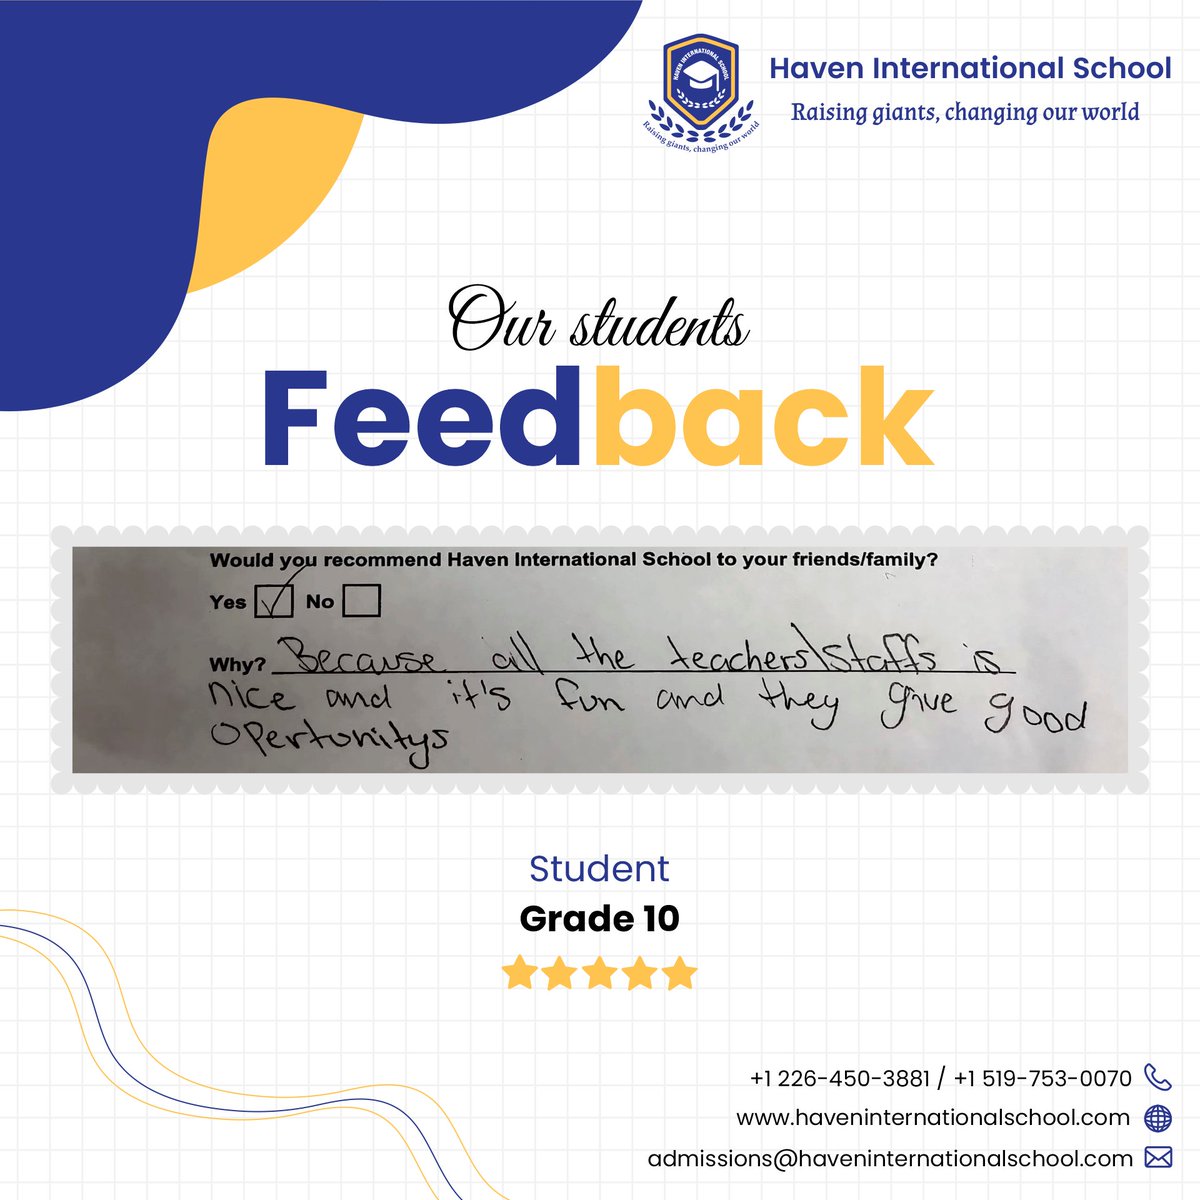 We're thrilled to share these incredible testimonials from our exceptional students of Grade 10! Their words truly reflect the positive impact our school has on young minds and the transformative educational experience we provide.
.
.
#HavenInternationalSchool #StudentTestimonial